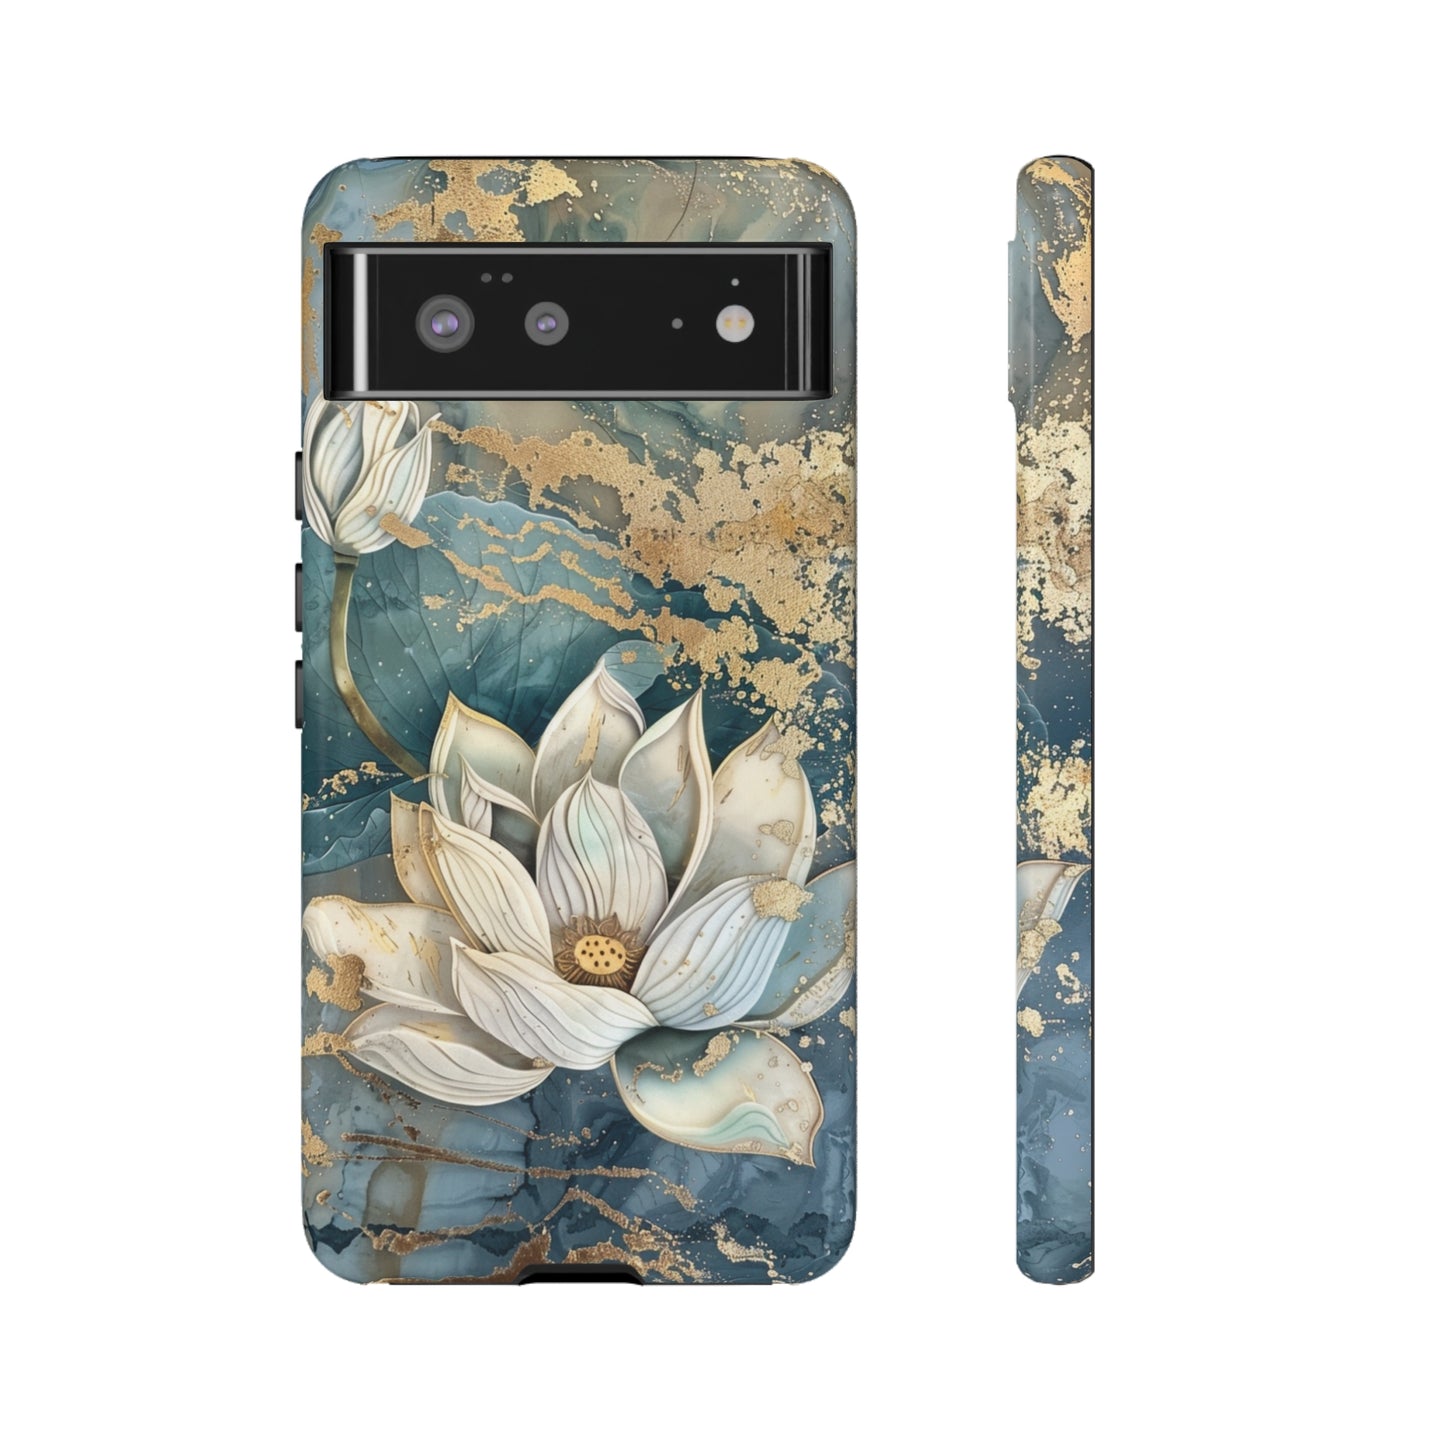 Zen Stained Glass Marble Lotus Floral Design Phone Case